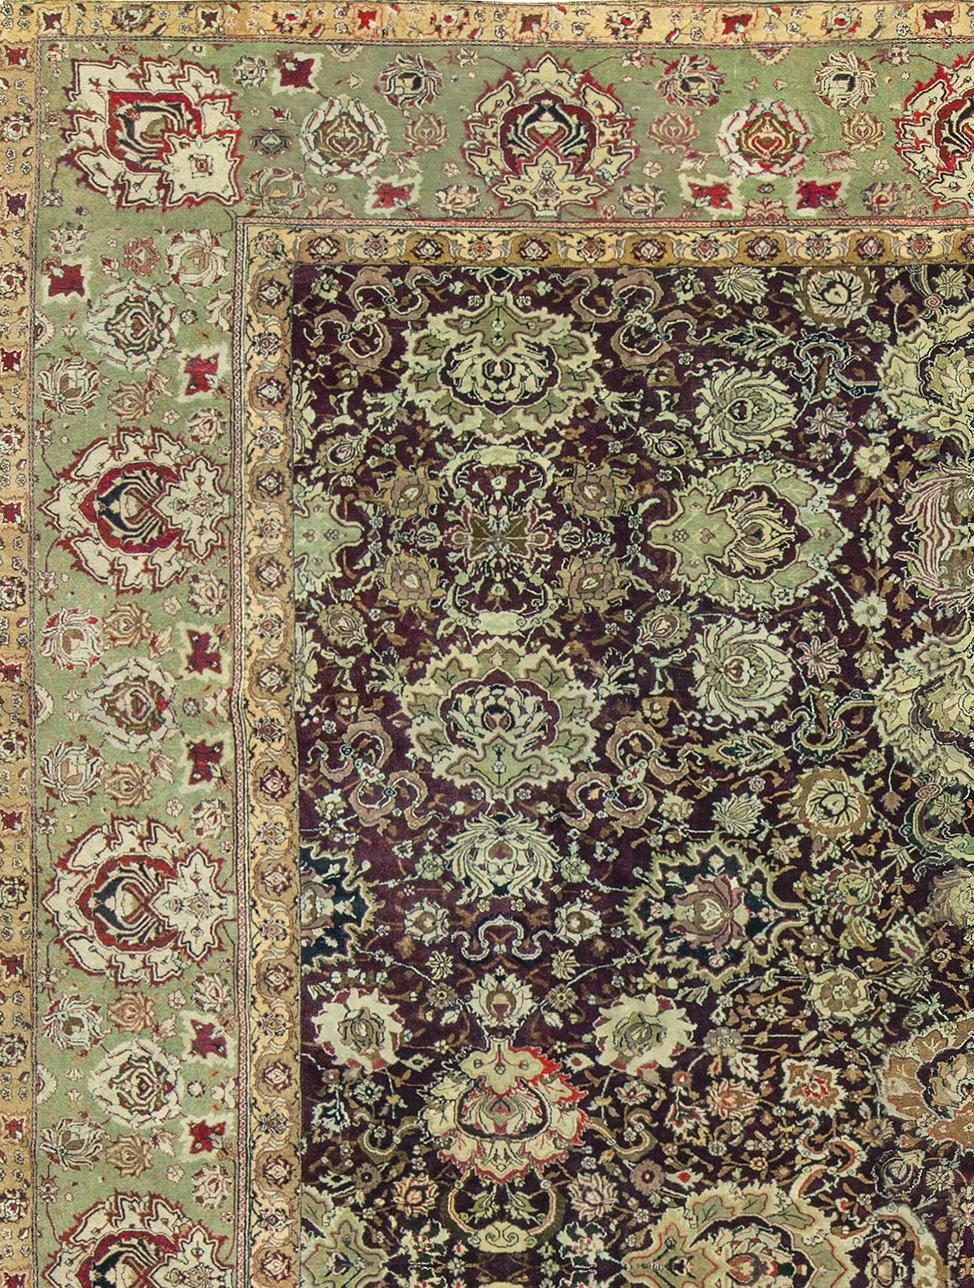 This is a marvelous example of an antique Agra. Handwoven in the 1880s the color is the typical and famous Agra red surrounded by an intricate green border to create this overall magnificent looking piece. During much of the history of the Mongol